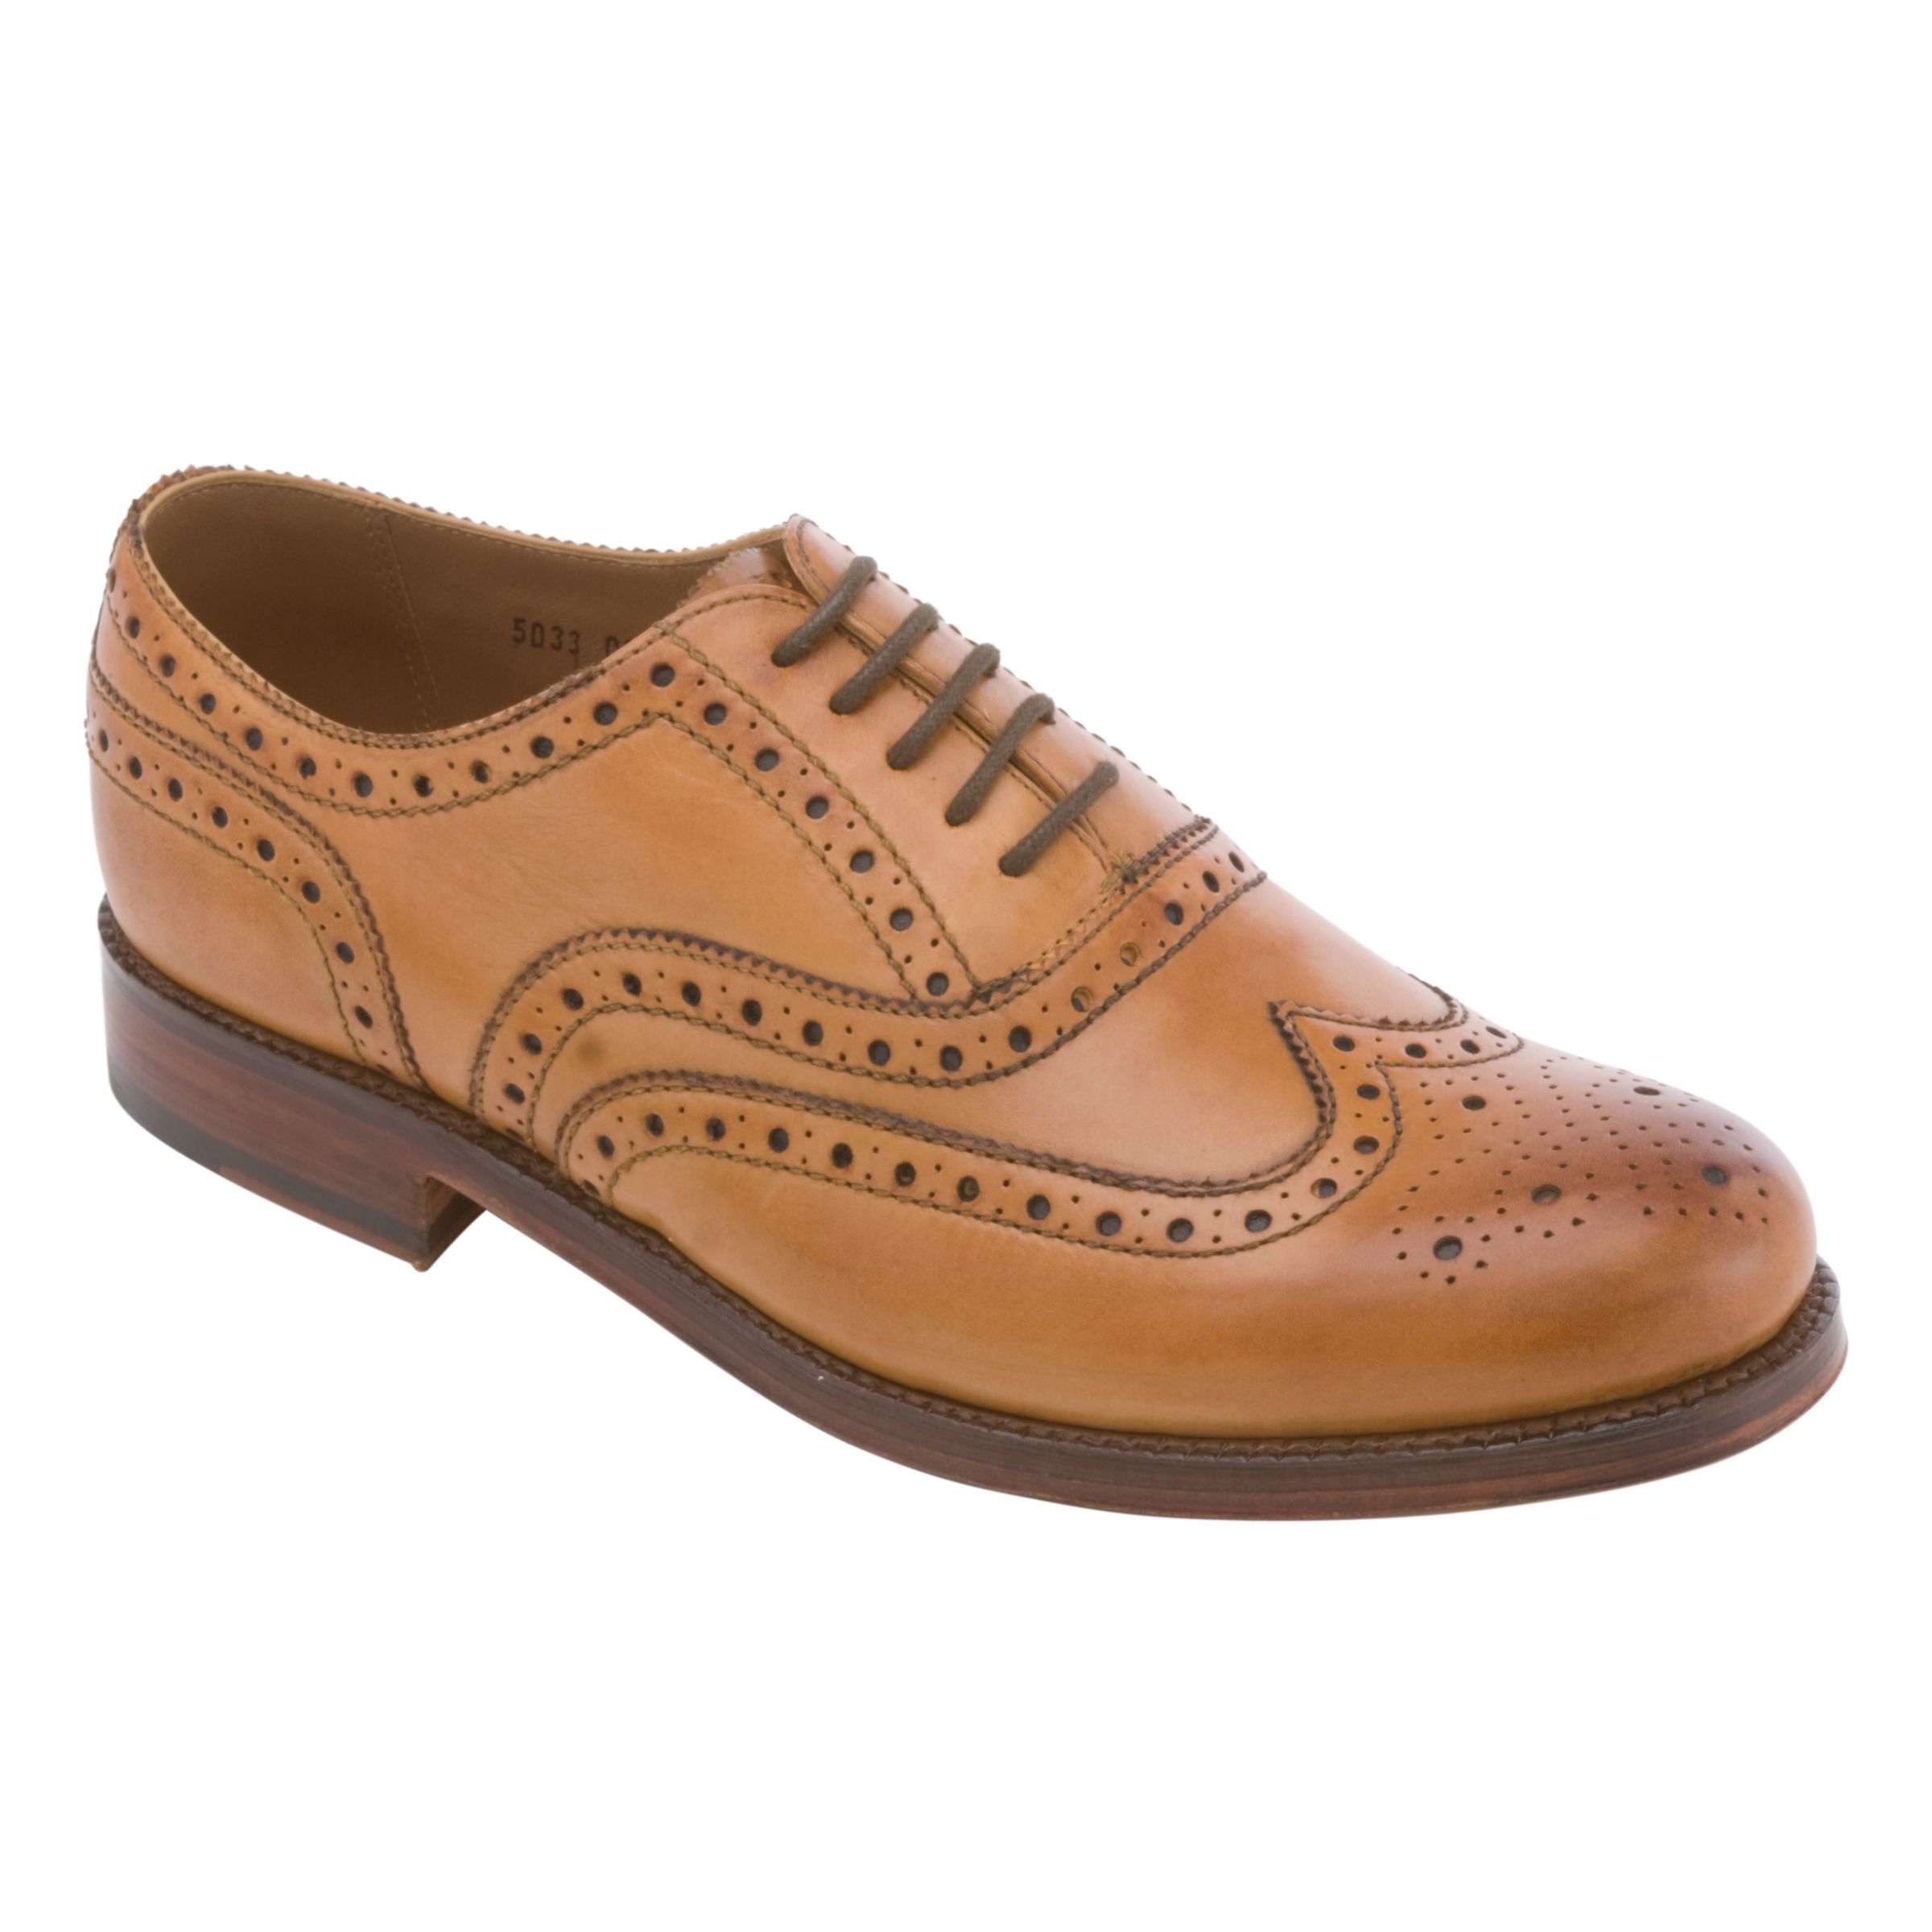 Grenson Stanley Leather Brogues, Tan at John Lewis